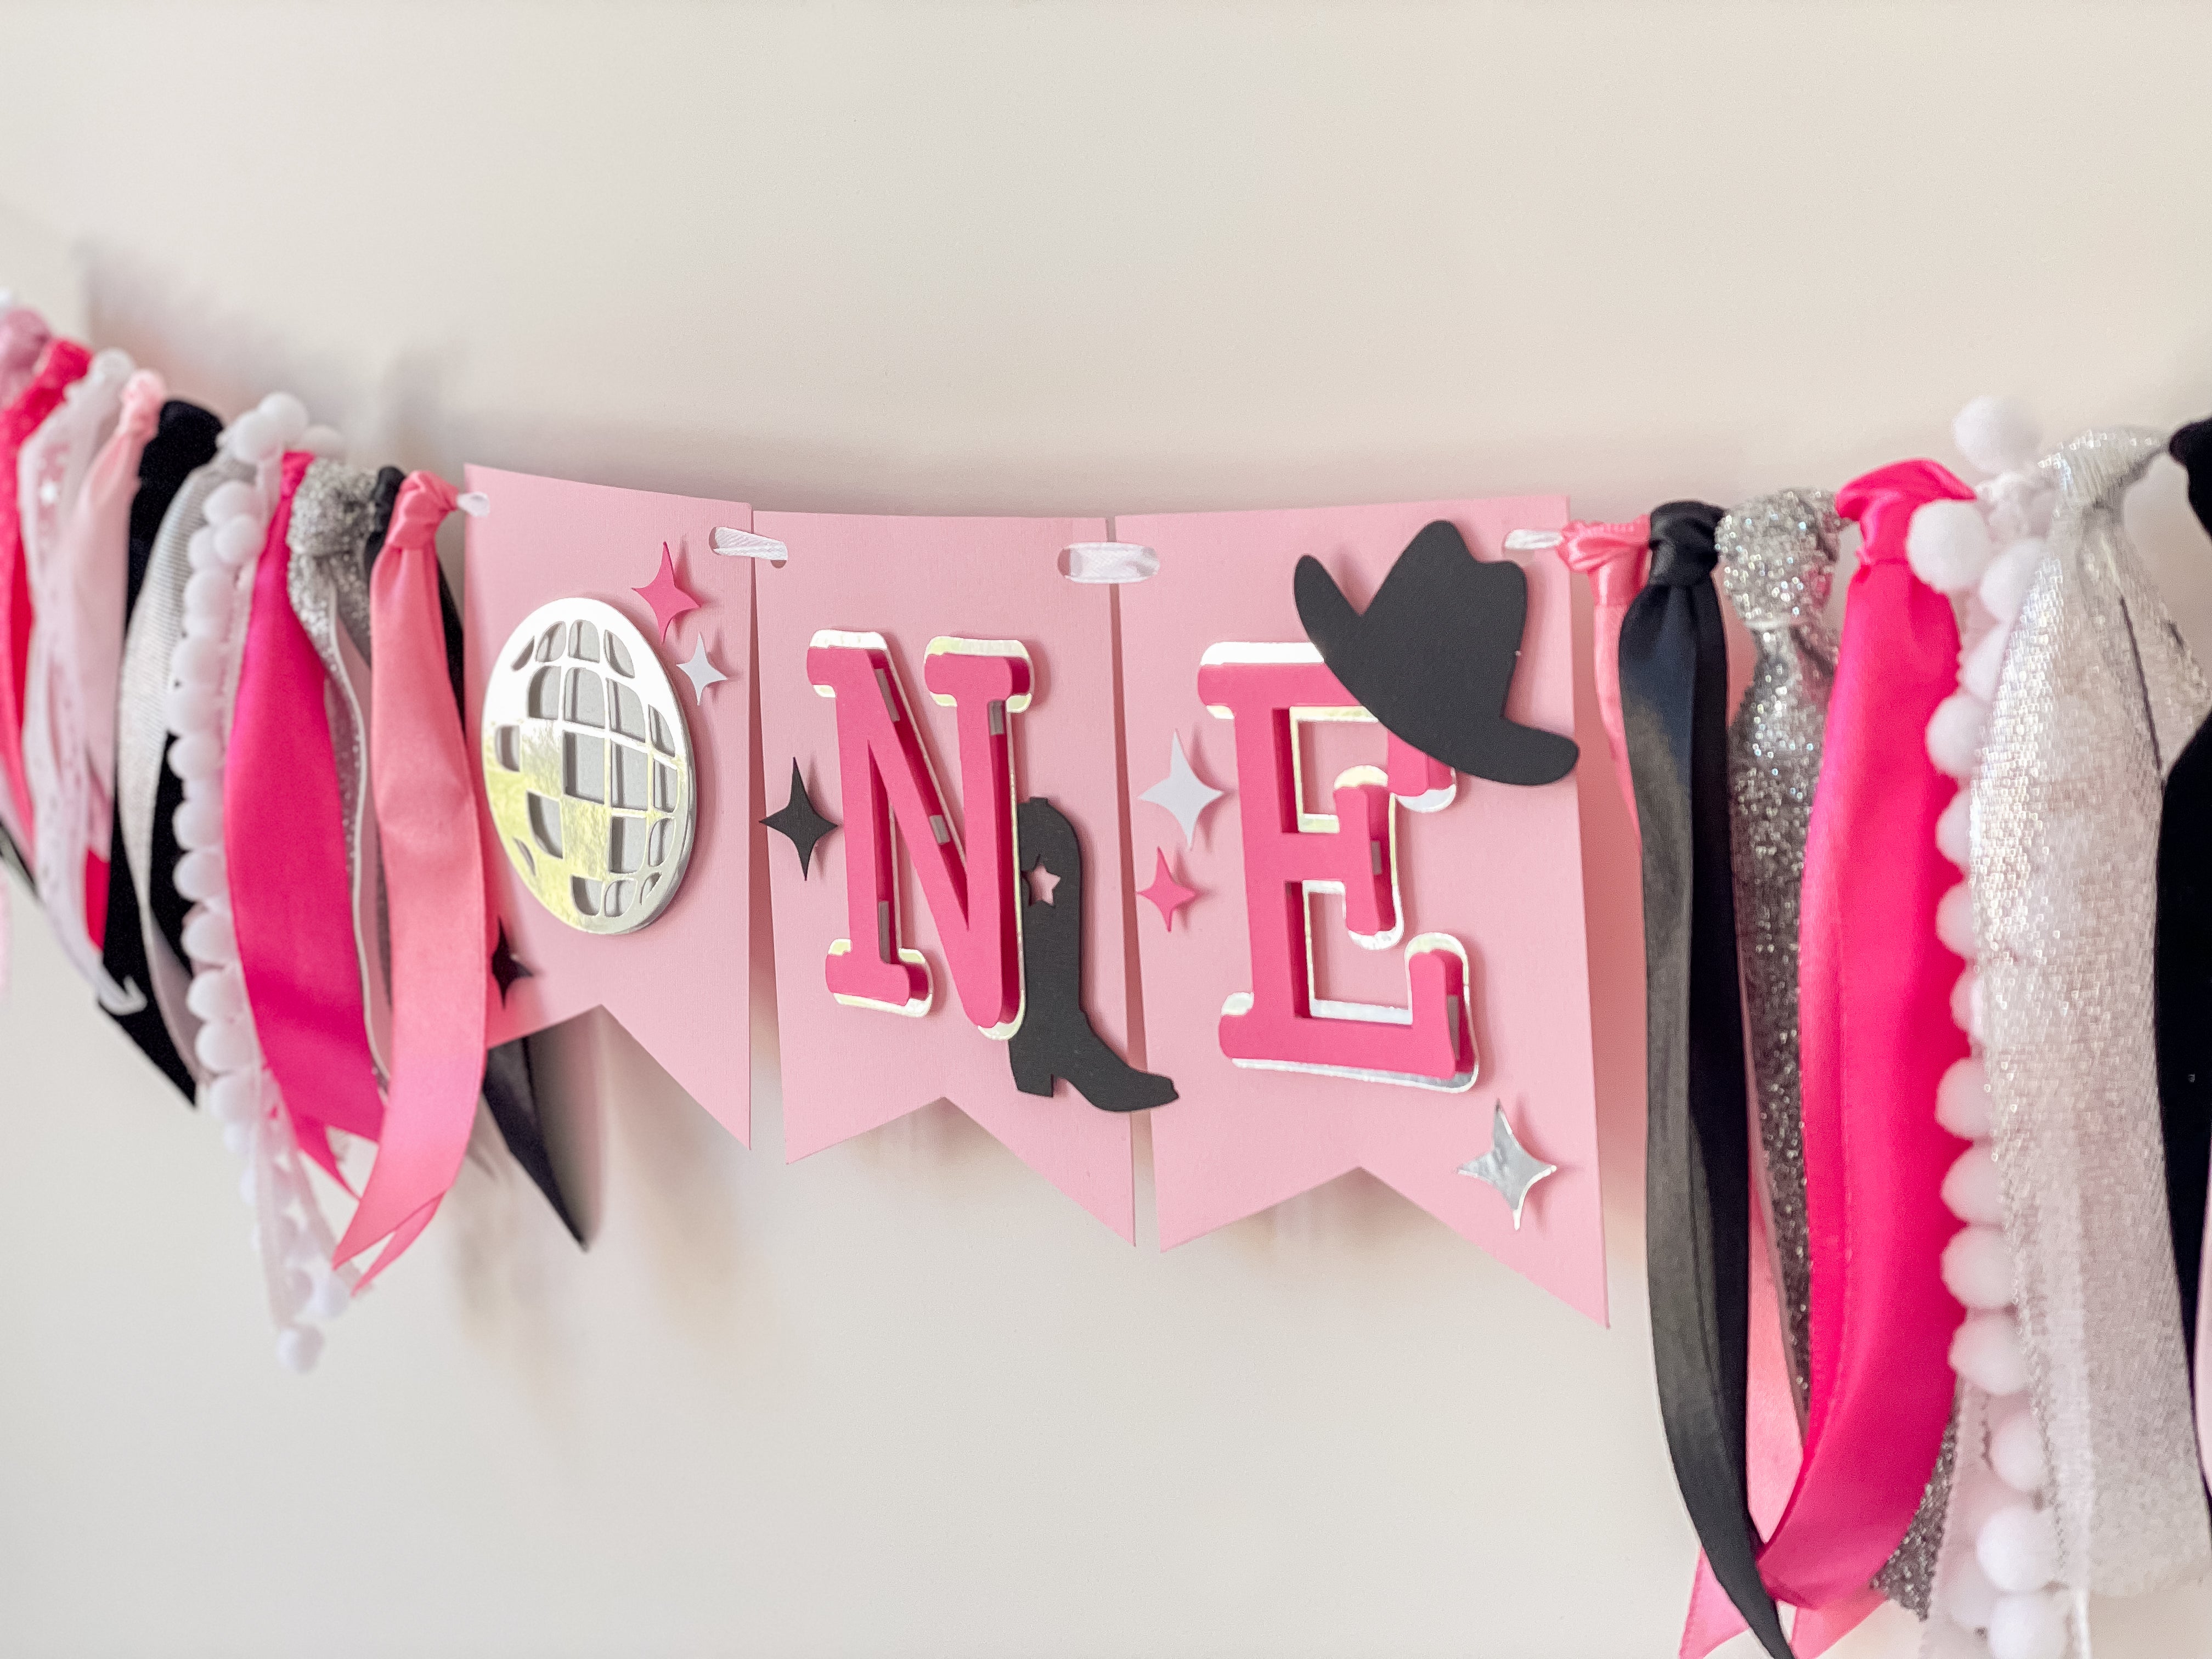 Girl Cowboy Rodeo Highchair Banner Cowboy Themed 1st Birthday Party Decorations My First Rodeo Girl Wild West Party Cowboy themed My 1st Rodeo Party